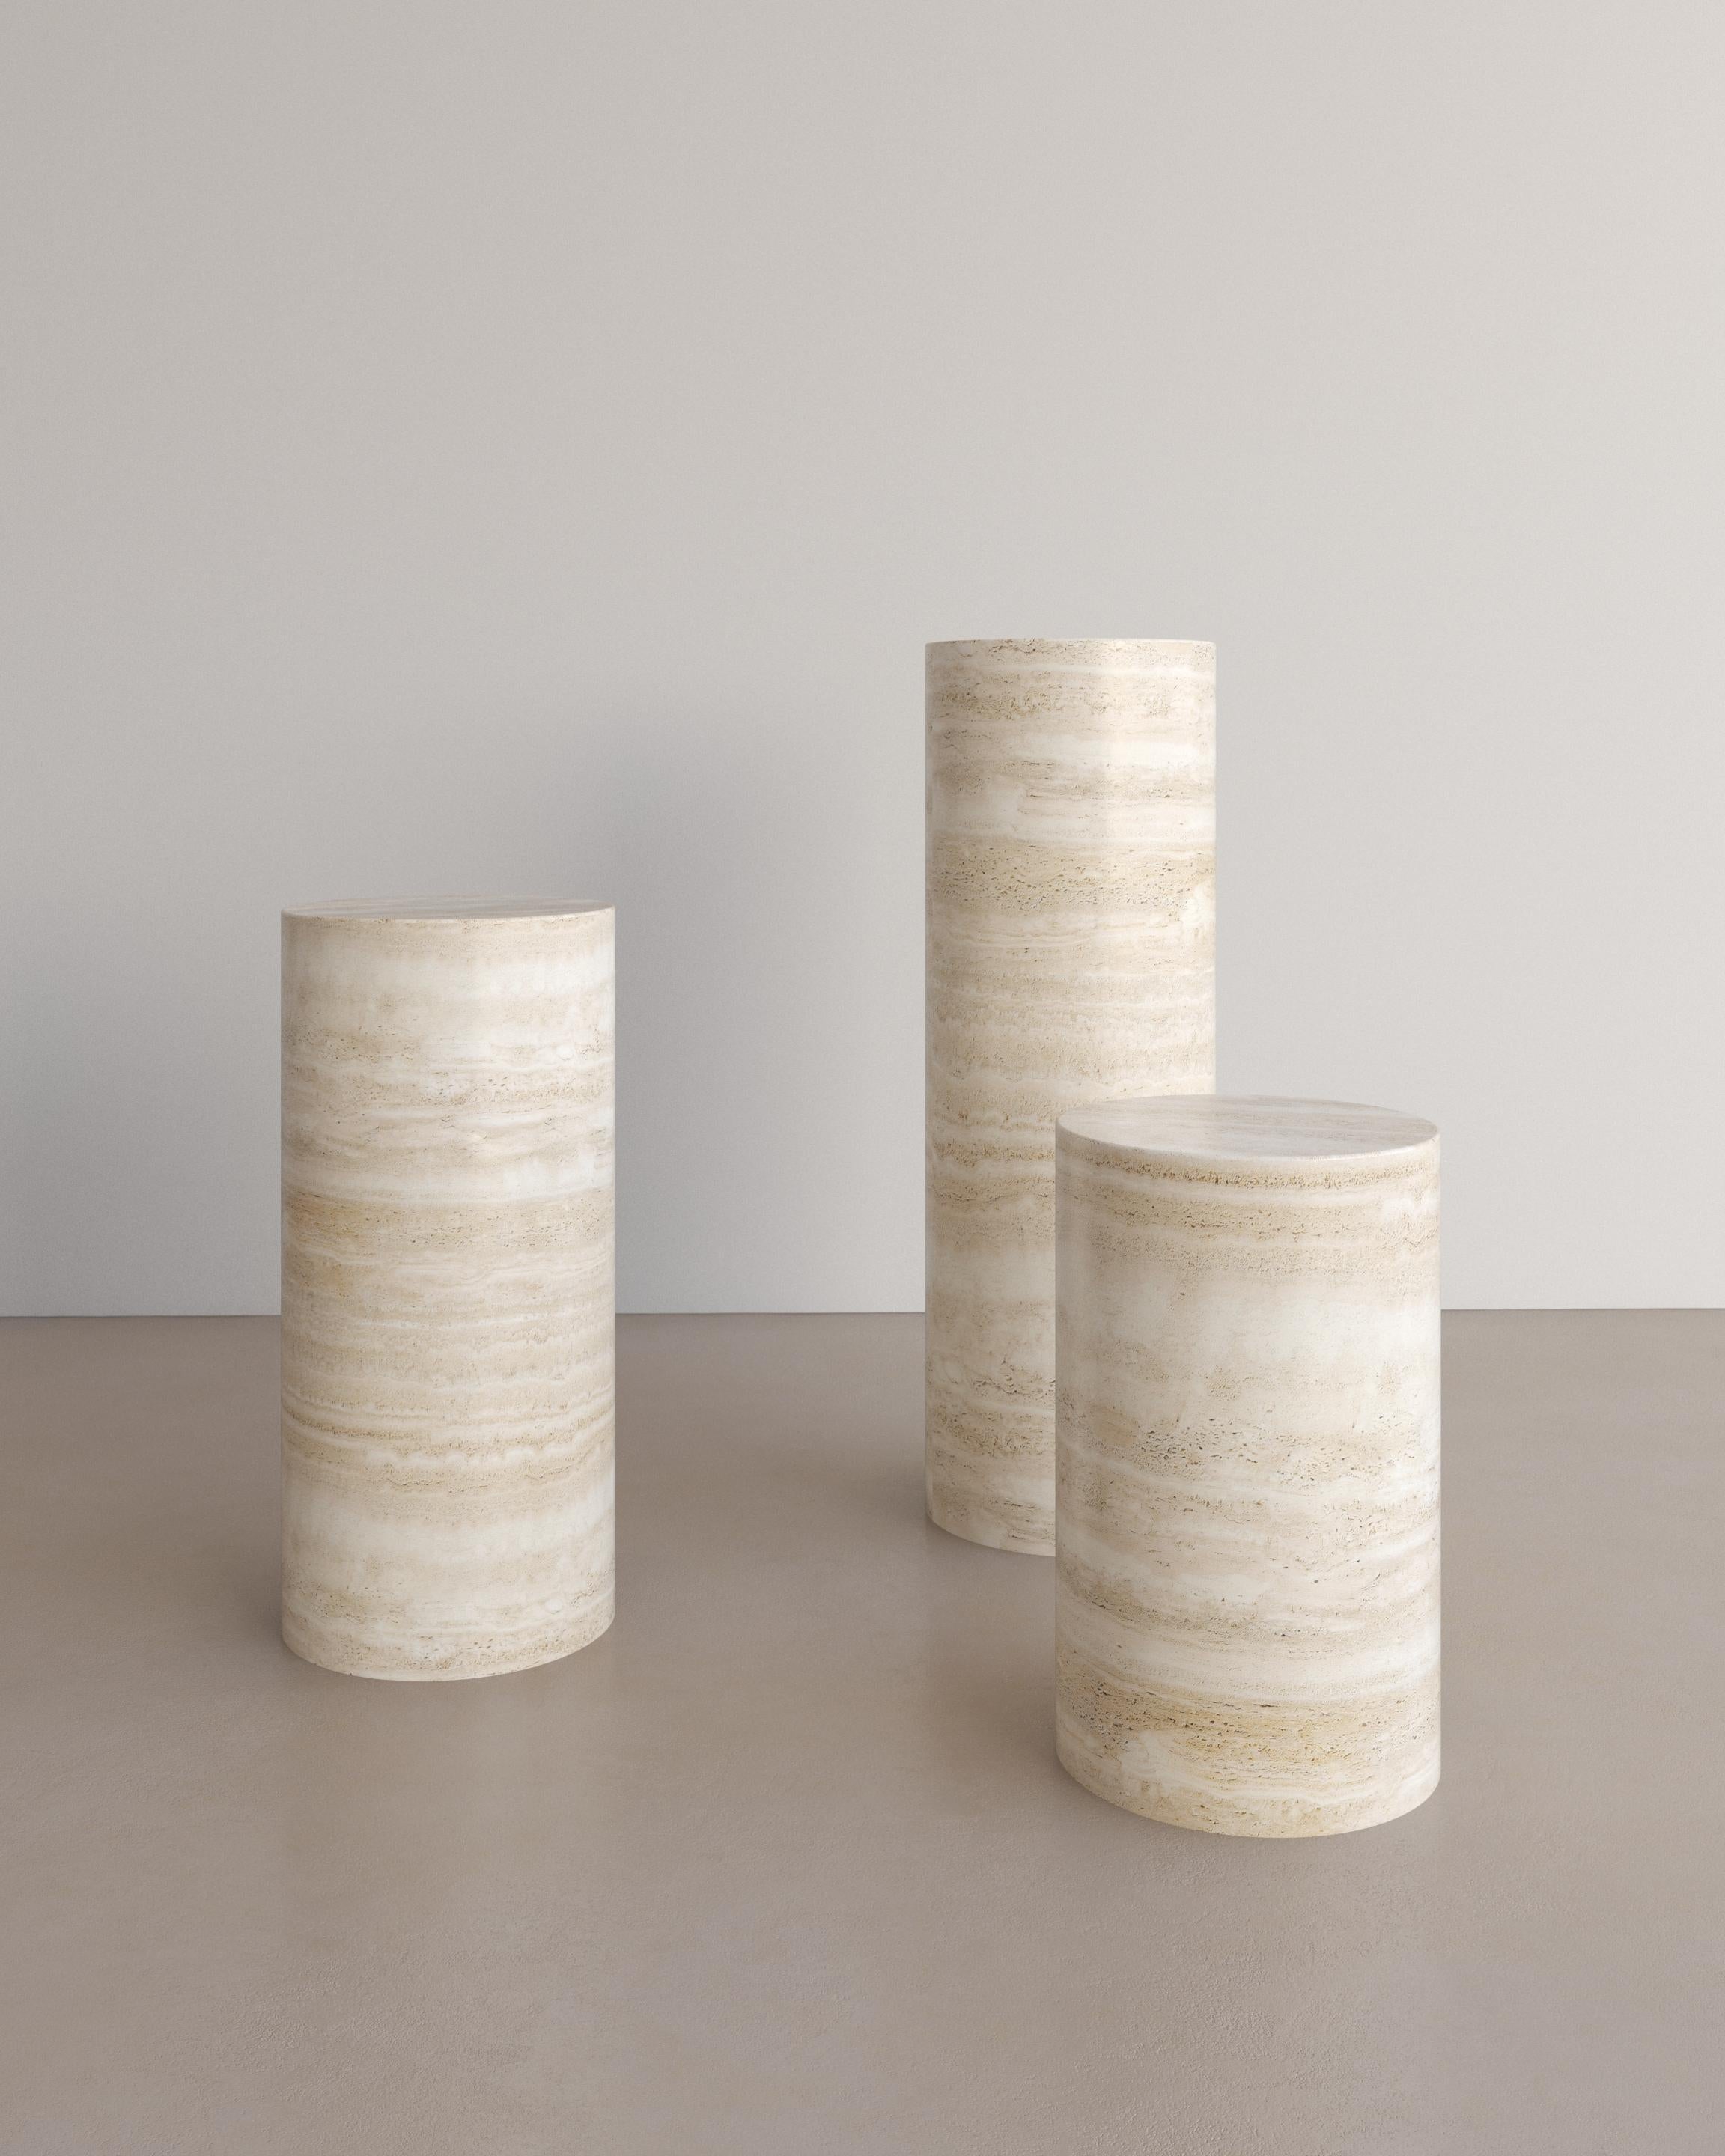 The Voyage Pedestal in Nude Travertine by The Essentialist is envisioned as an ode to historical elegance, captured through a modern lens of minimalistic opulence. Play with scale and verticality by positioning two or three varying heights within